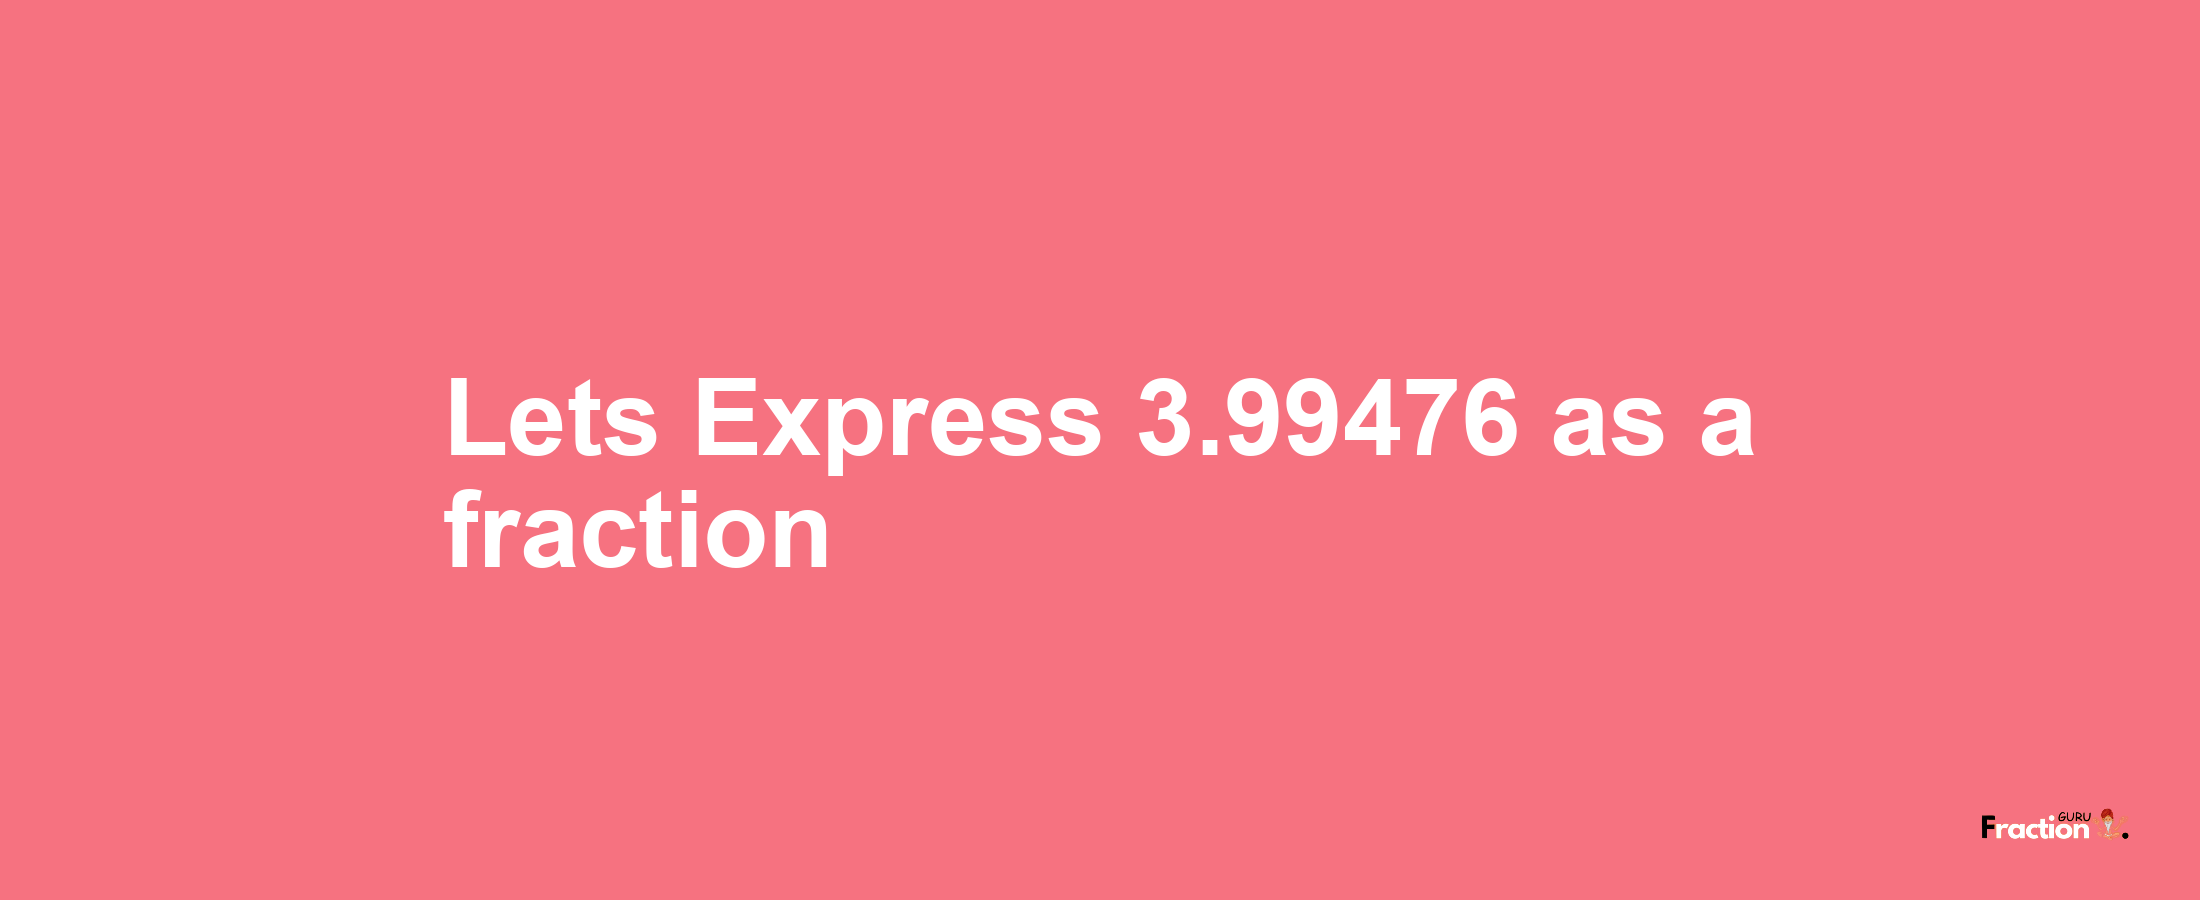 Lets Express 3.99476 as afraction